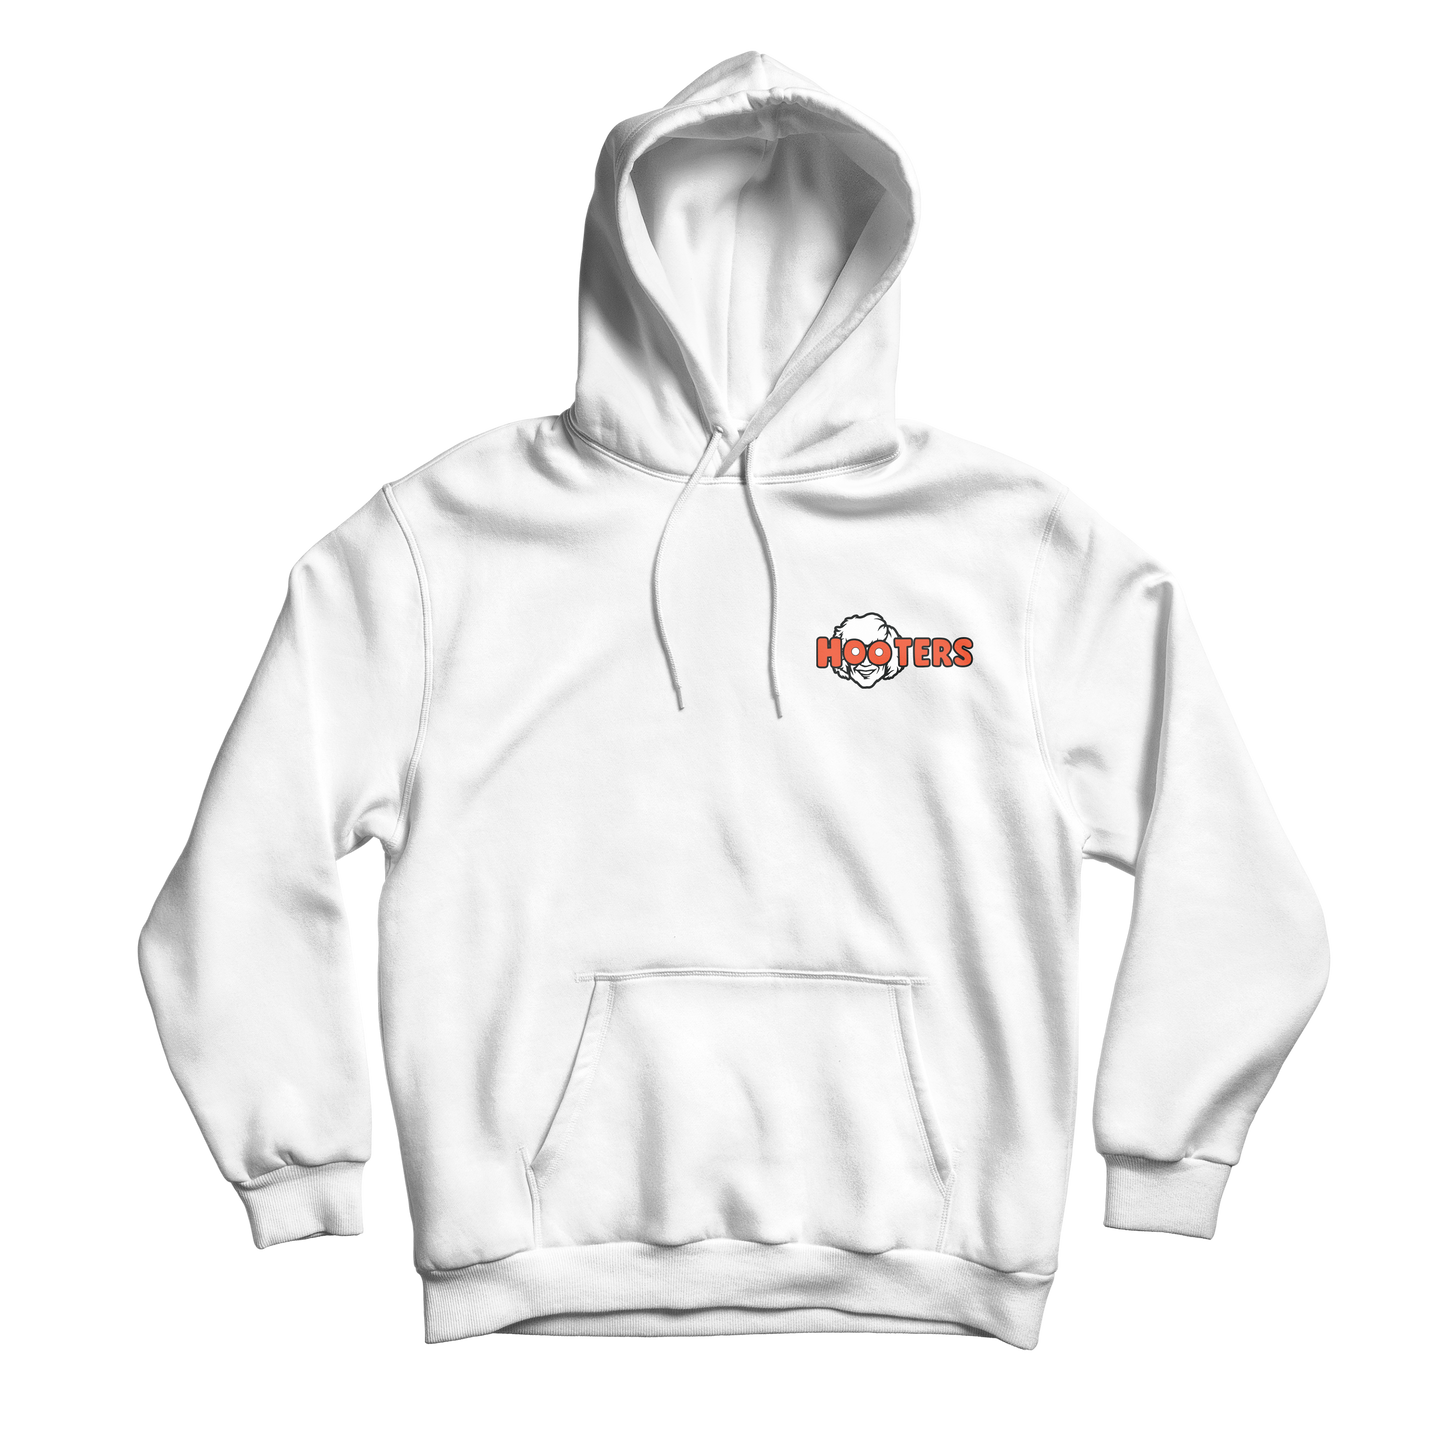 Danny Duncan x Hooters Embroidered White Hoodie